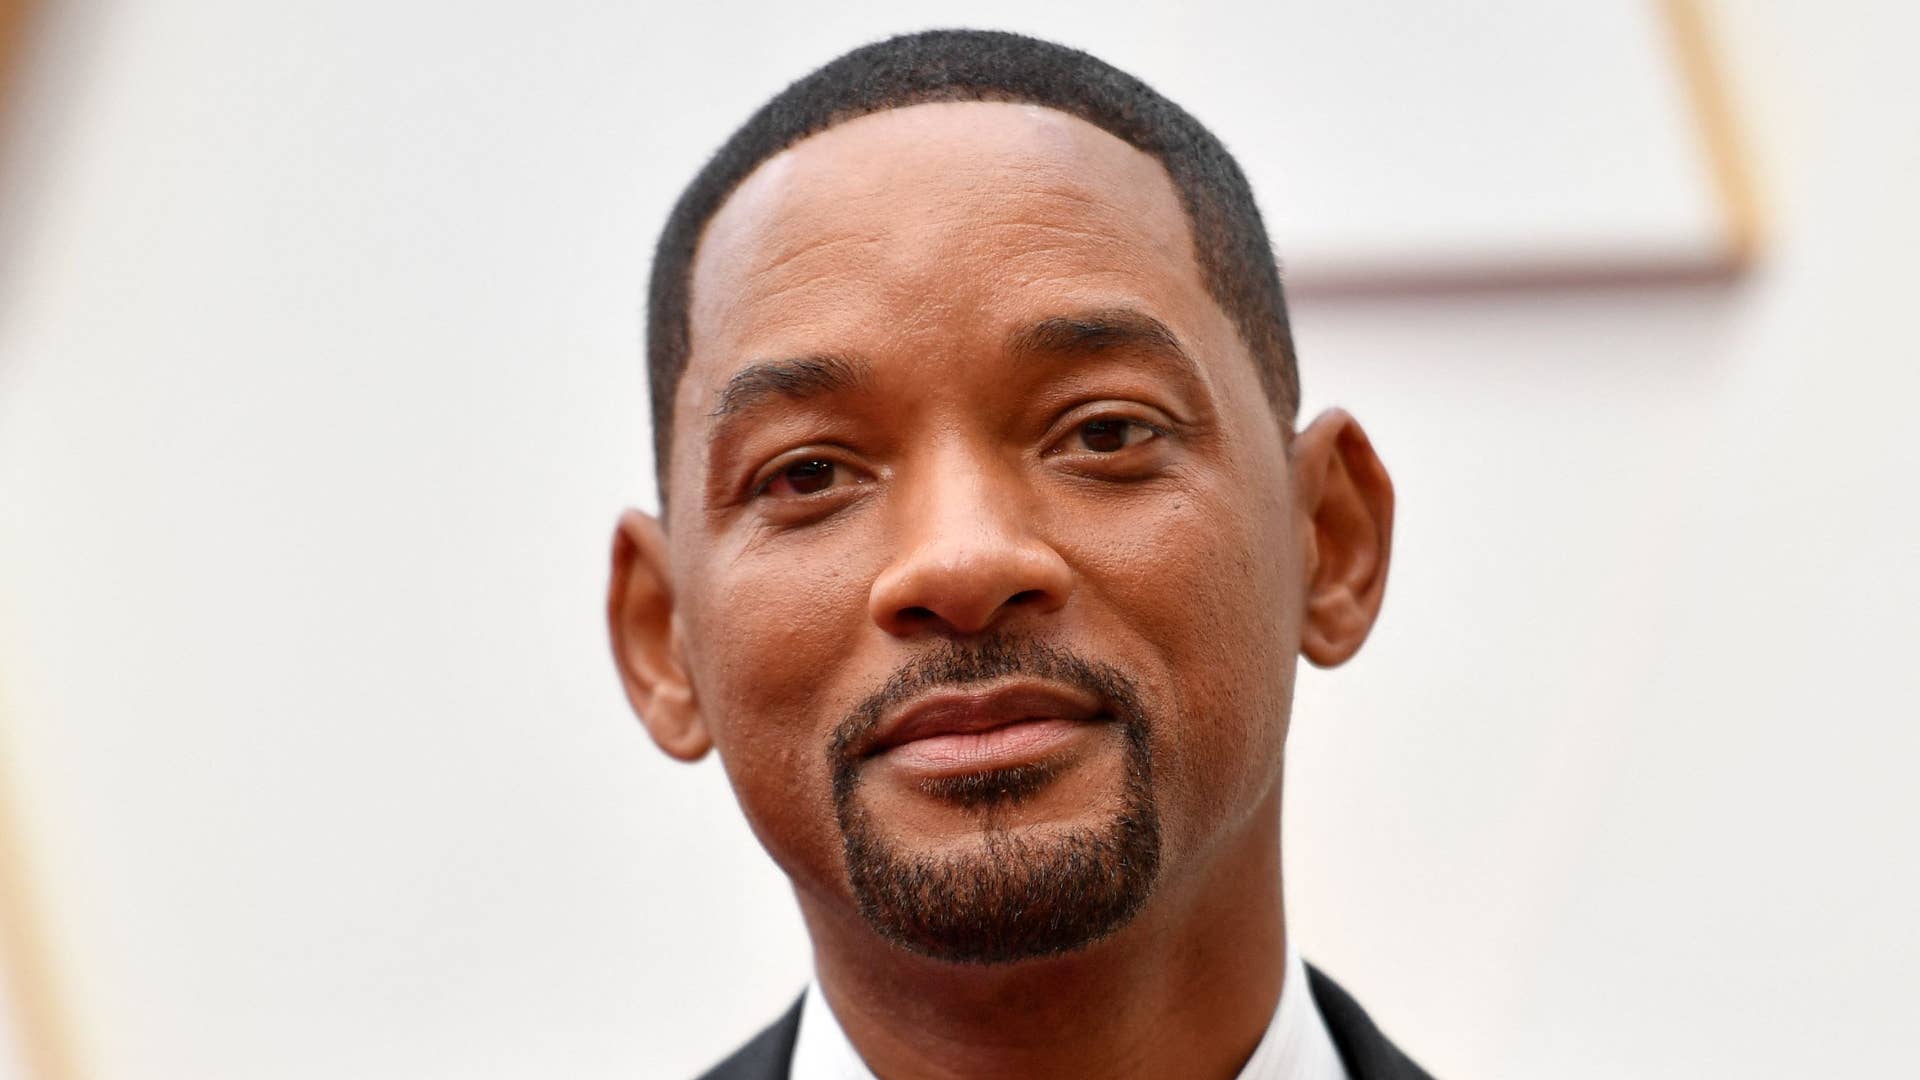 Will Smith pictured on the red carpet of the 2022 Oscars.